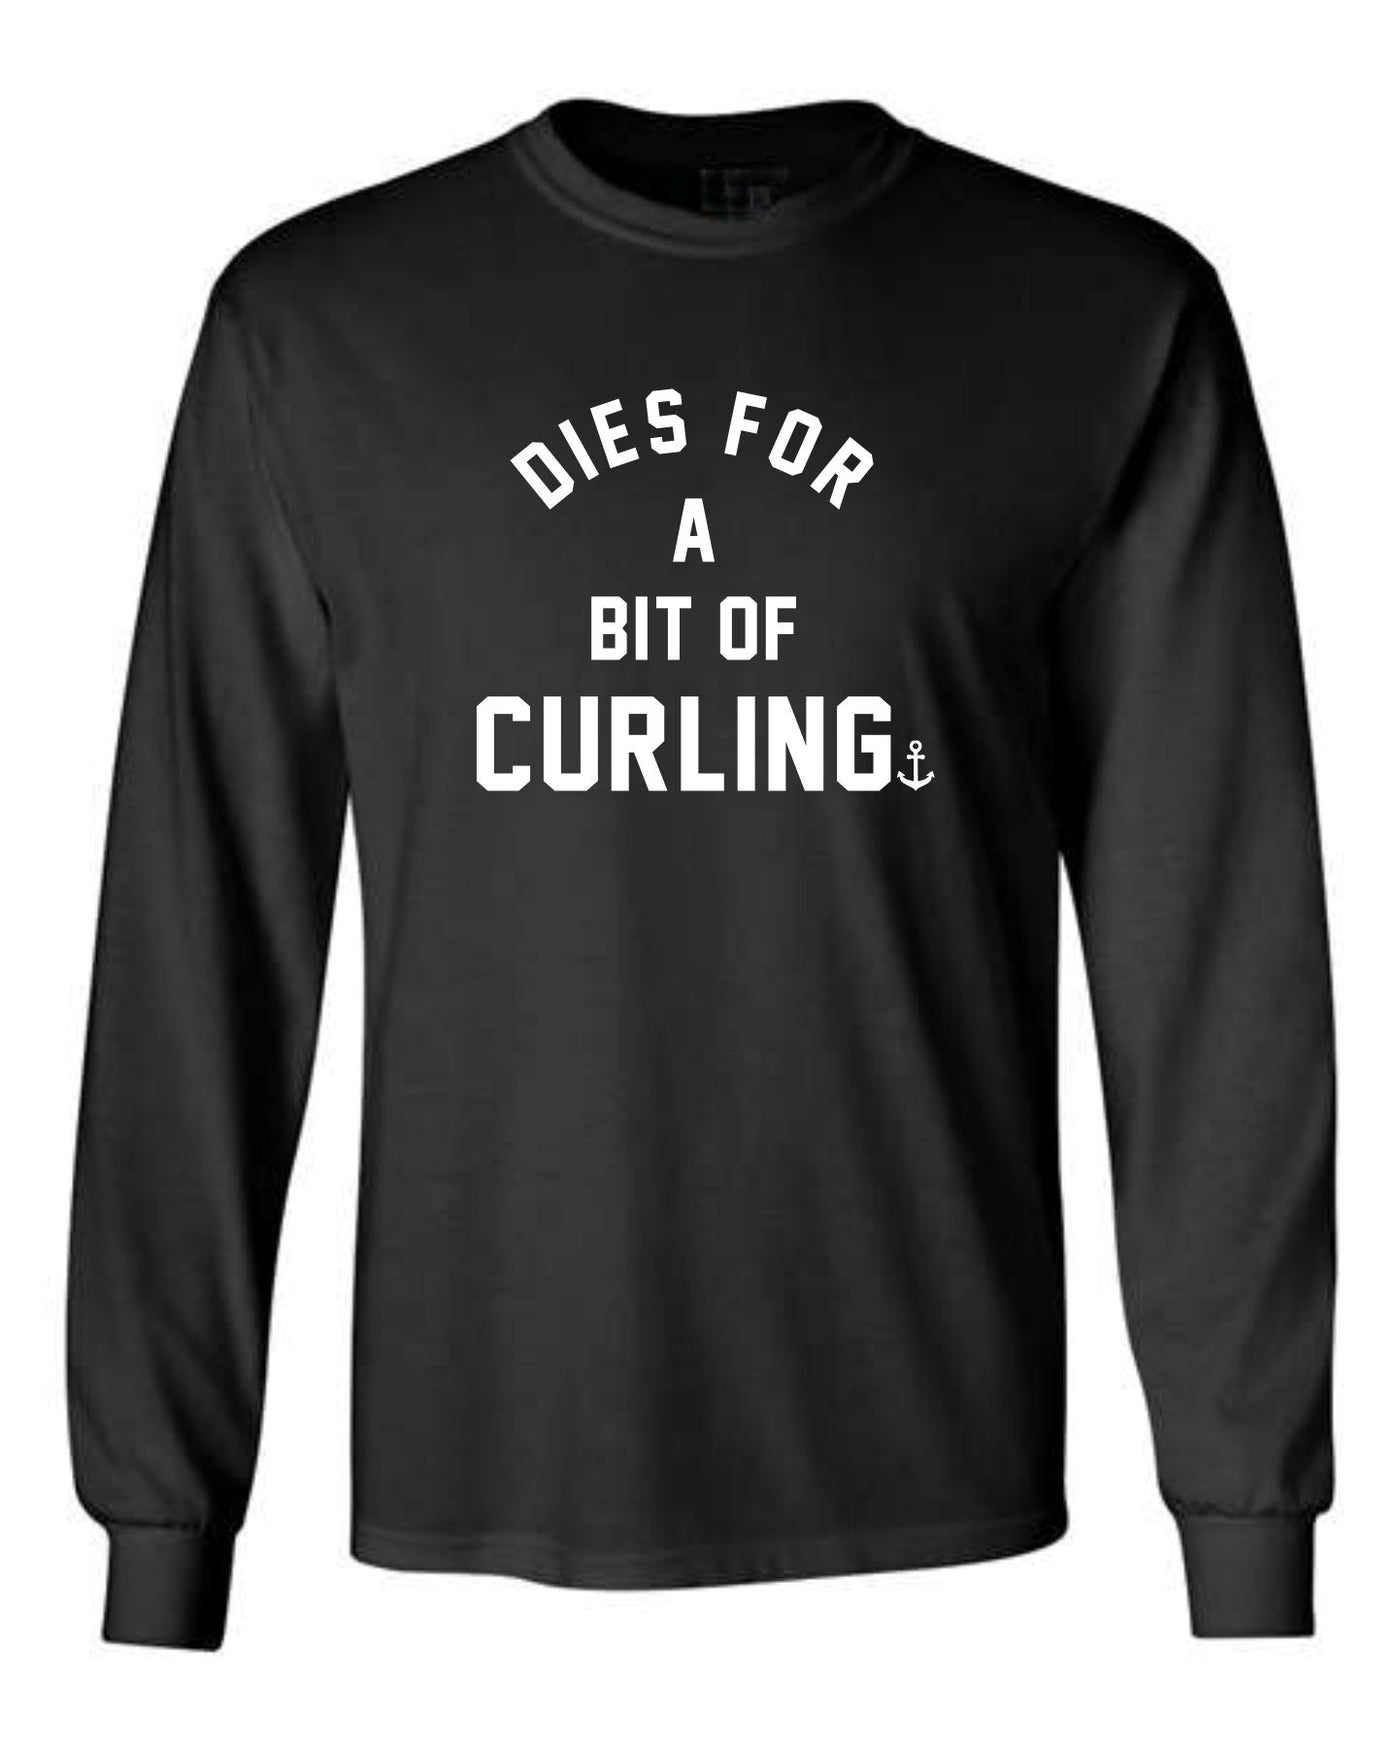 "Dies For A Bit Of Curling" Unisex Long Sleeve Shirt